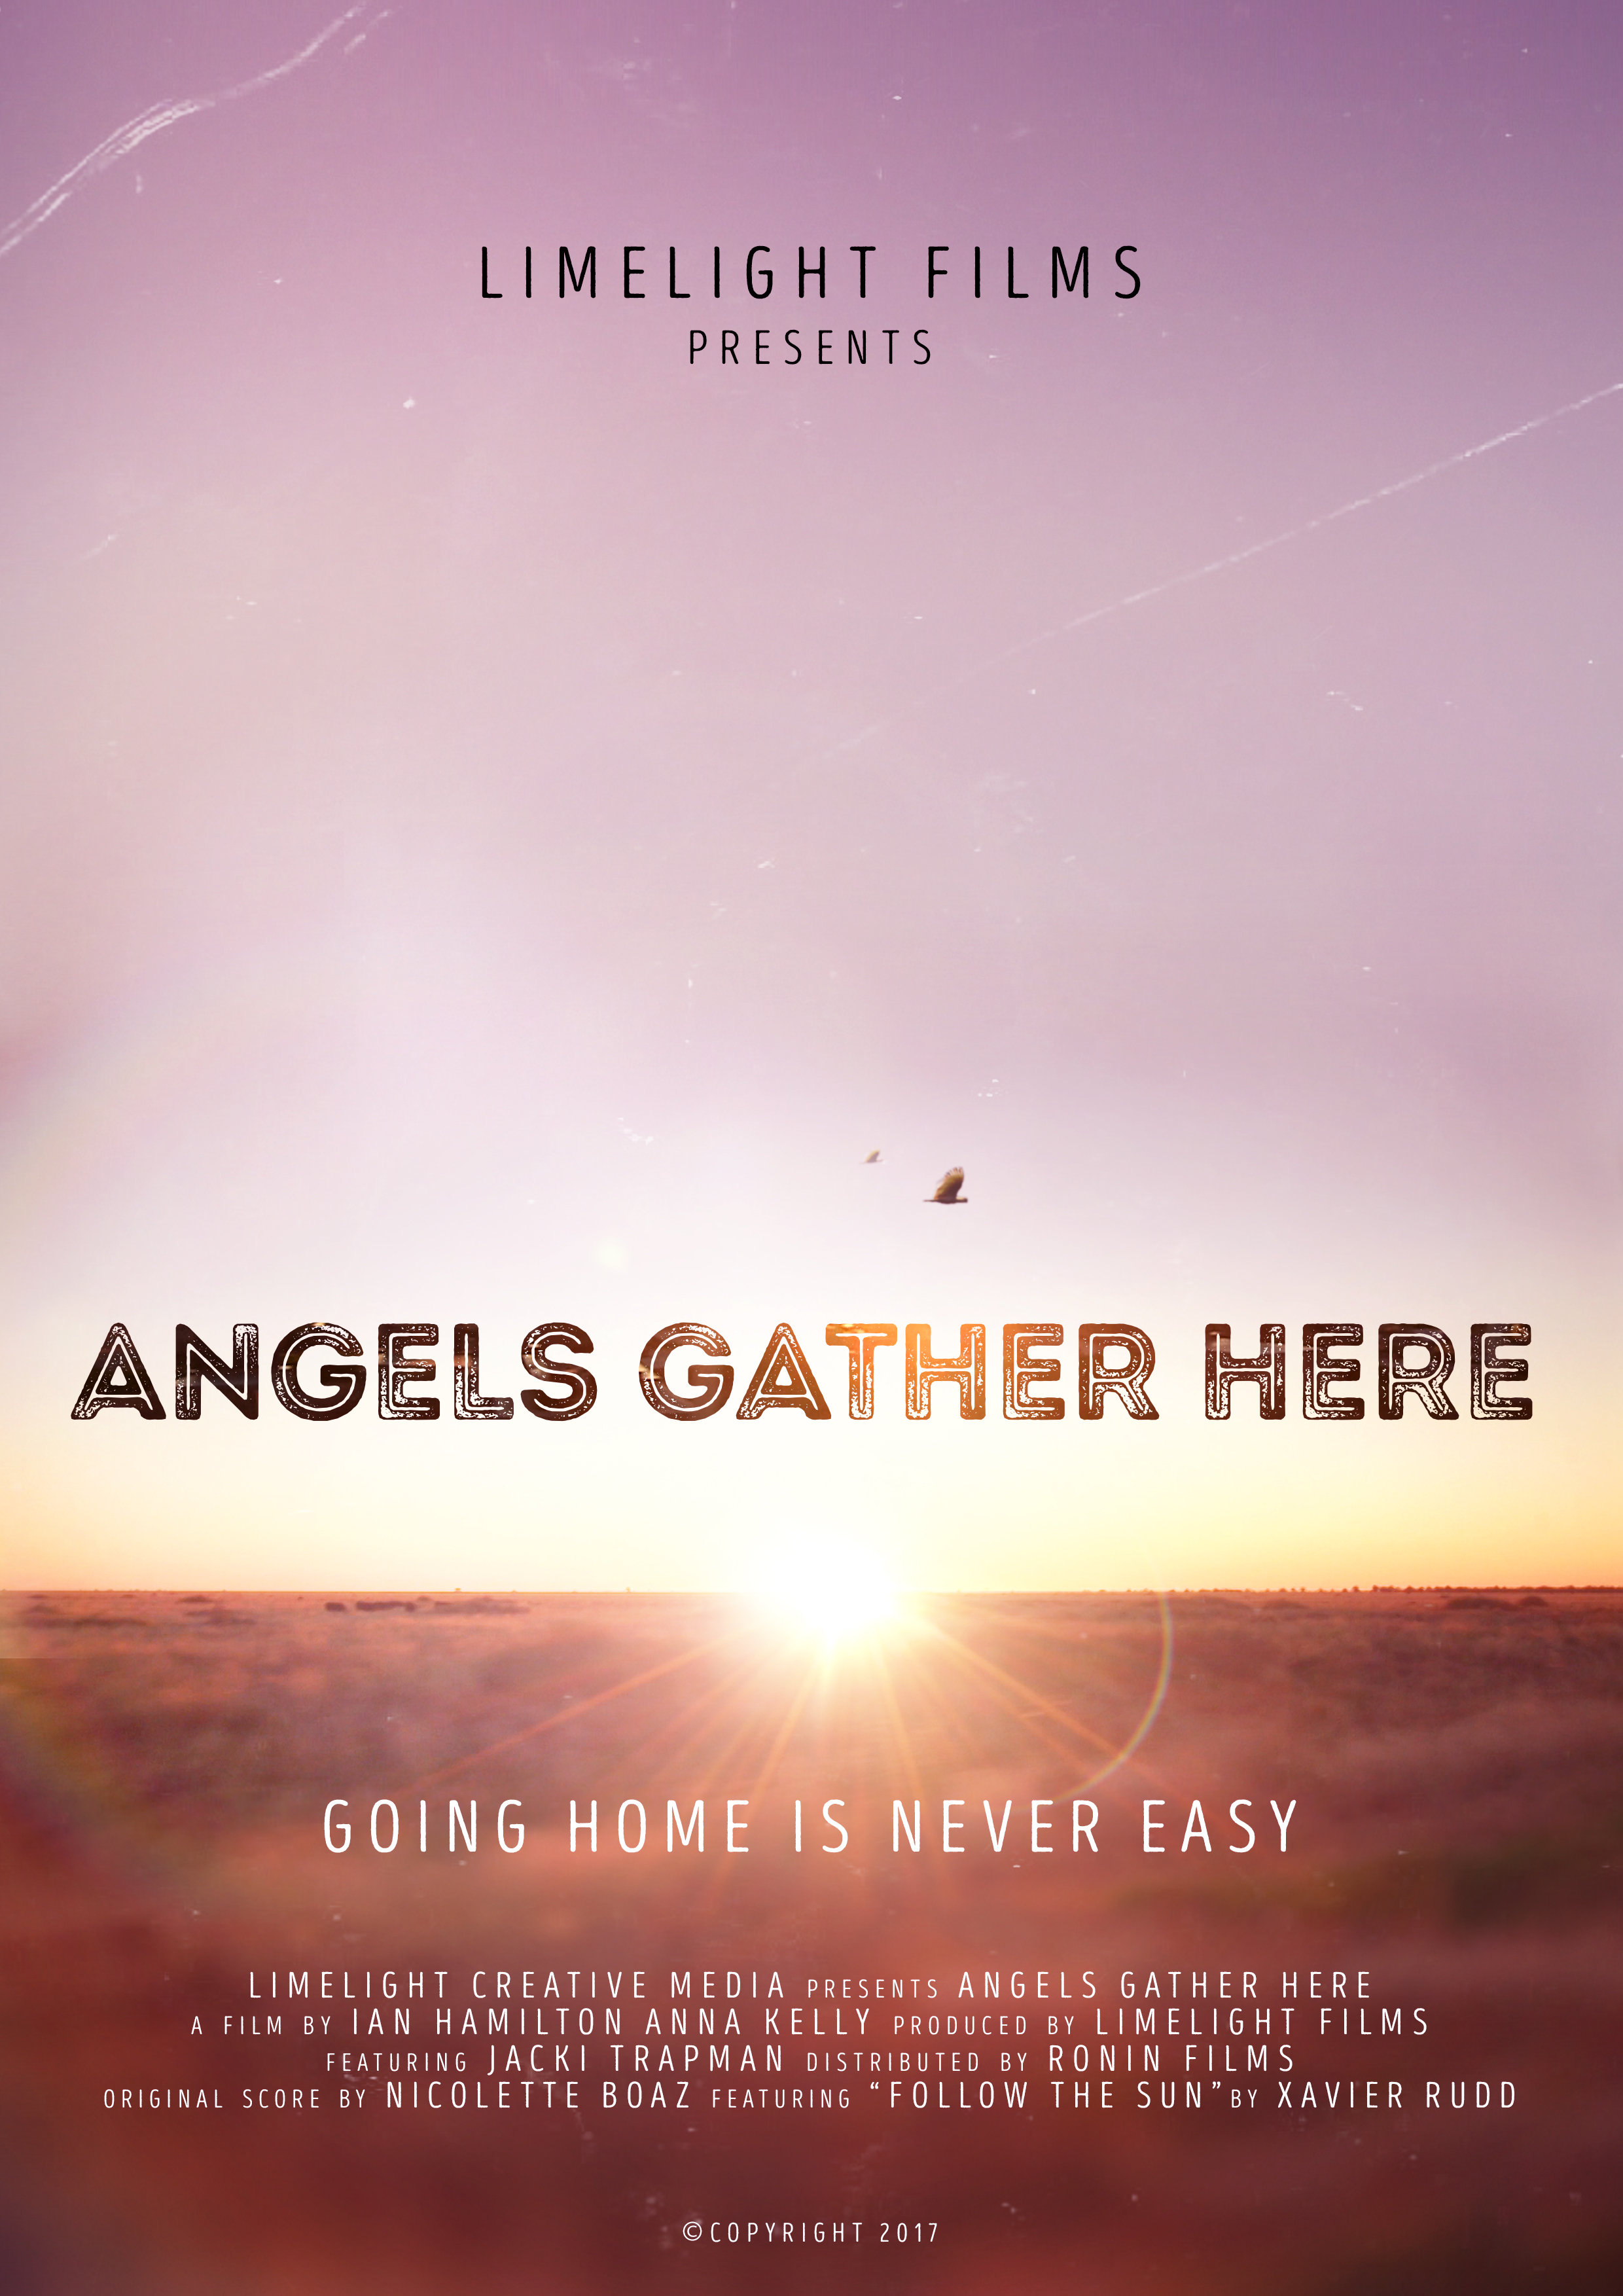 Gather here. Films about Angels.